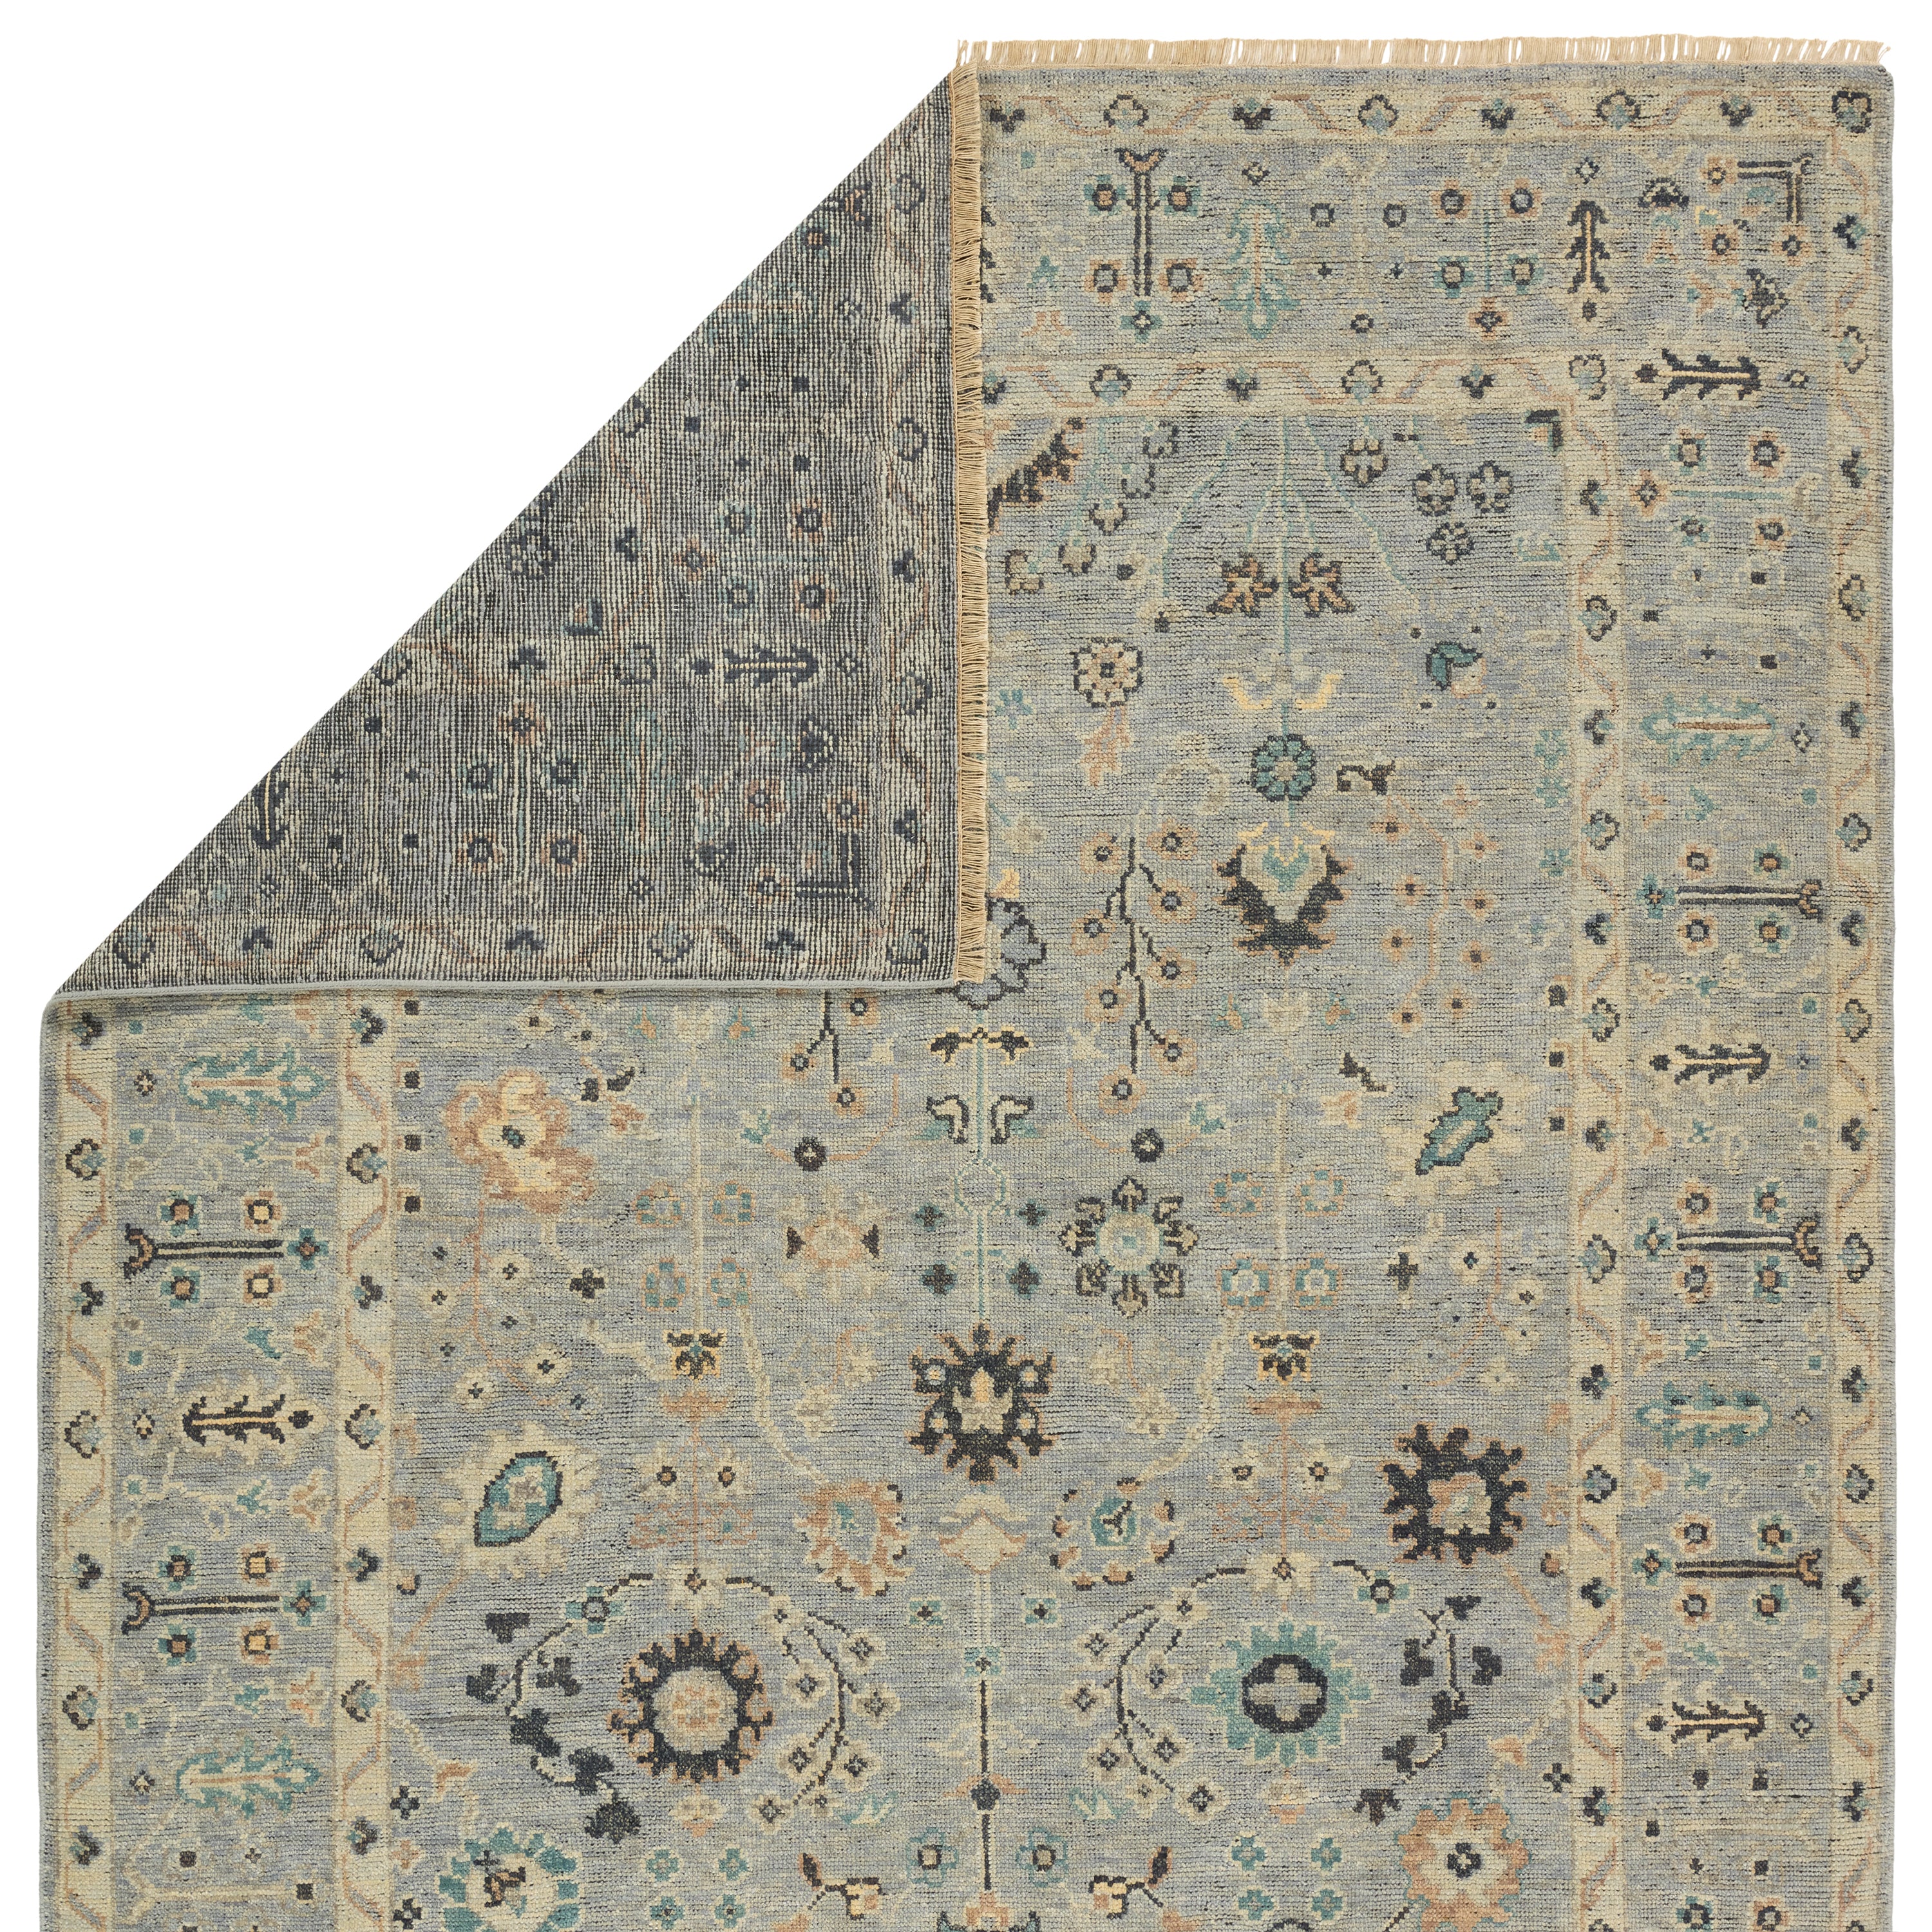 The Rhapsody collection features heirloom-quality designs of stunningly abrashed Old World patterns. The Nysa area rug boasts a beautifully washed floral motif with a decorative border. The blue tone is accented with rich green, tan, navy, and cream hues for added depth and intrigue. This durable wool handknot anchors living spaces with a fresh take on vintage style. Amethyst Home provides interior design, new construction, custom furniture, and area rugs in the Kansas City metro area.